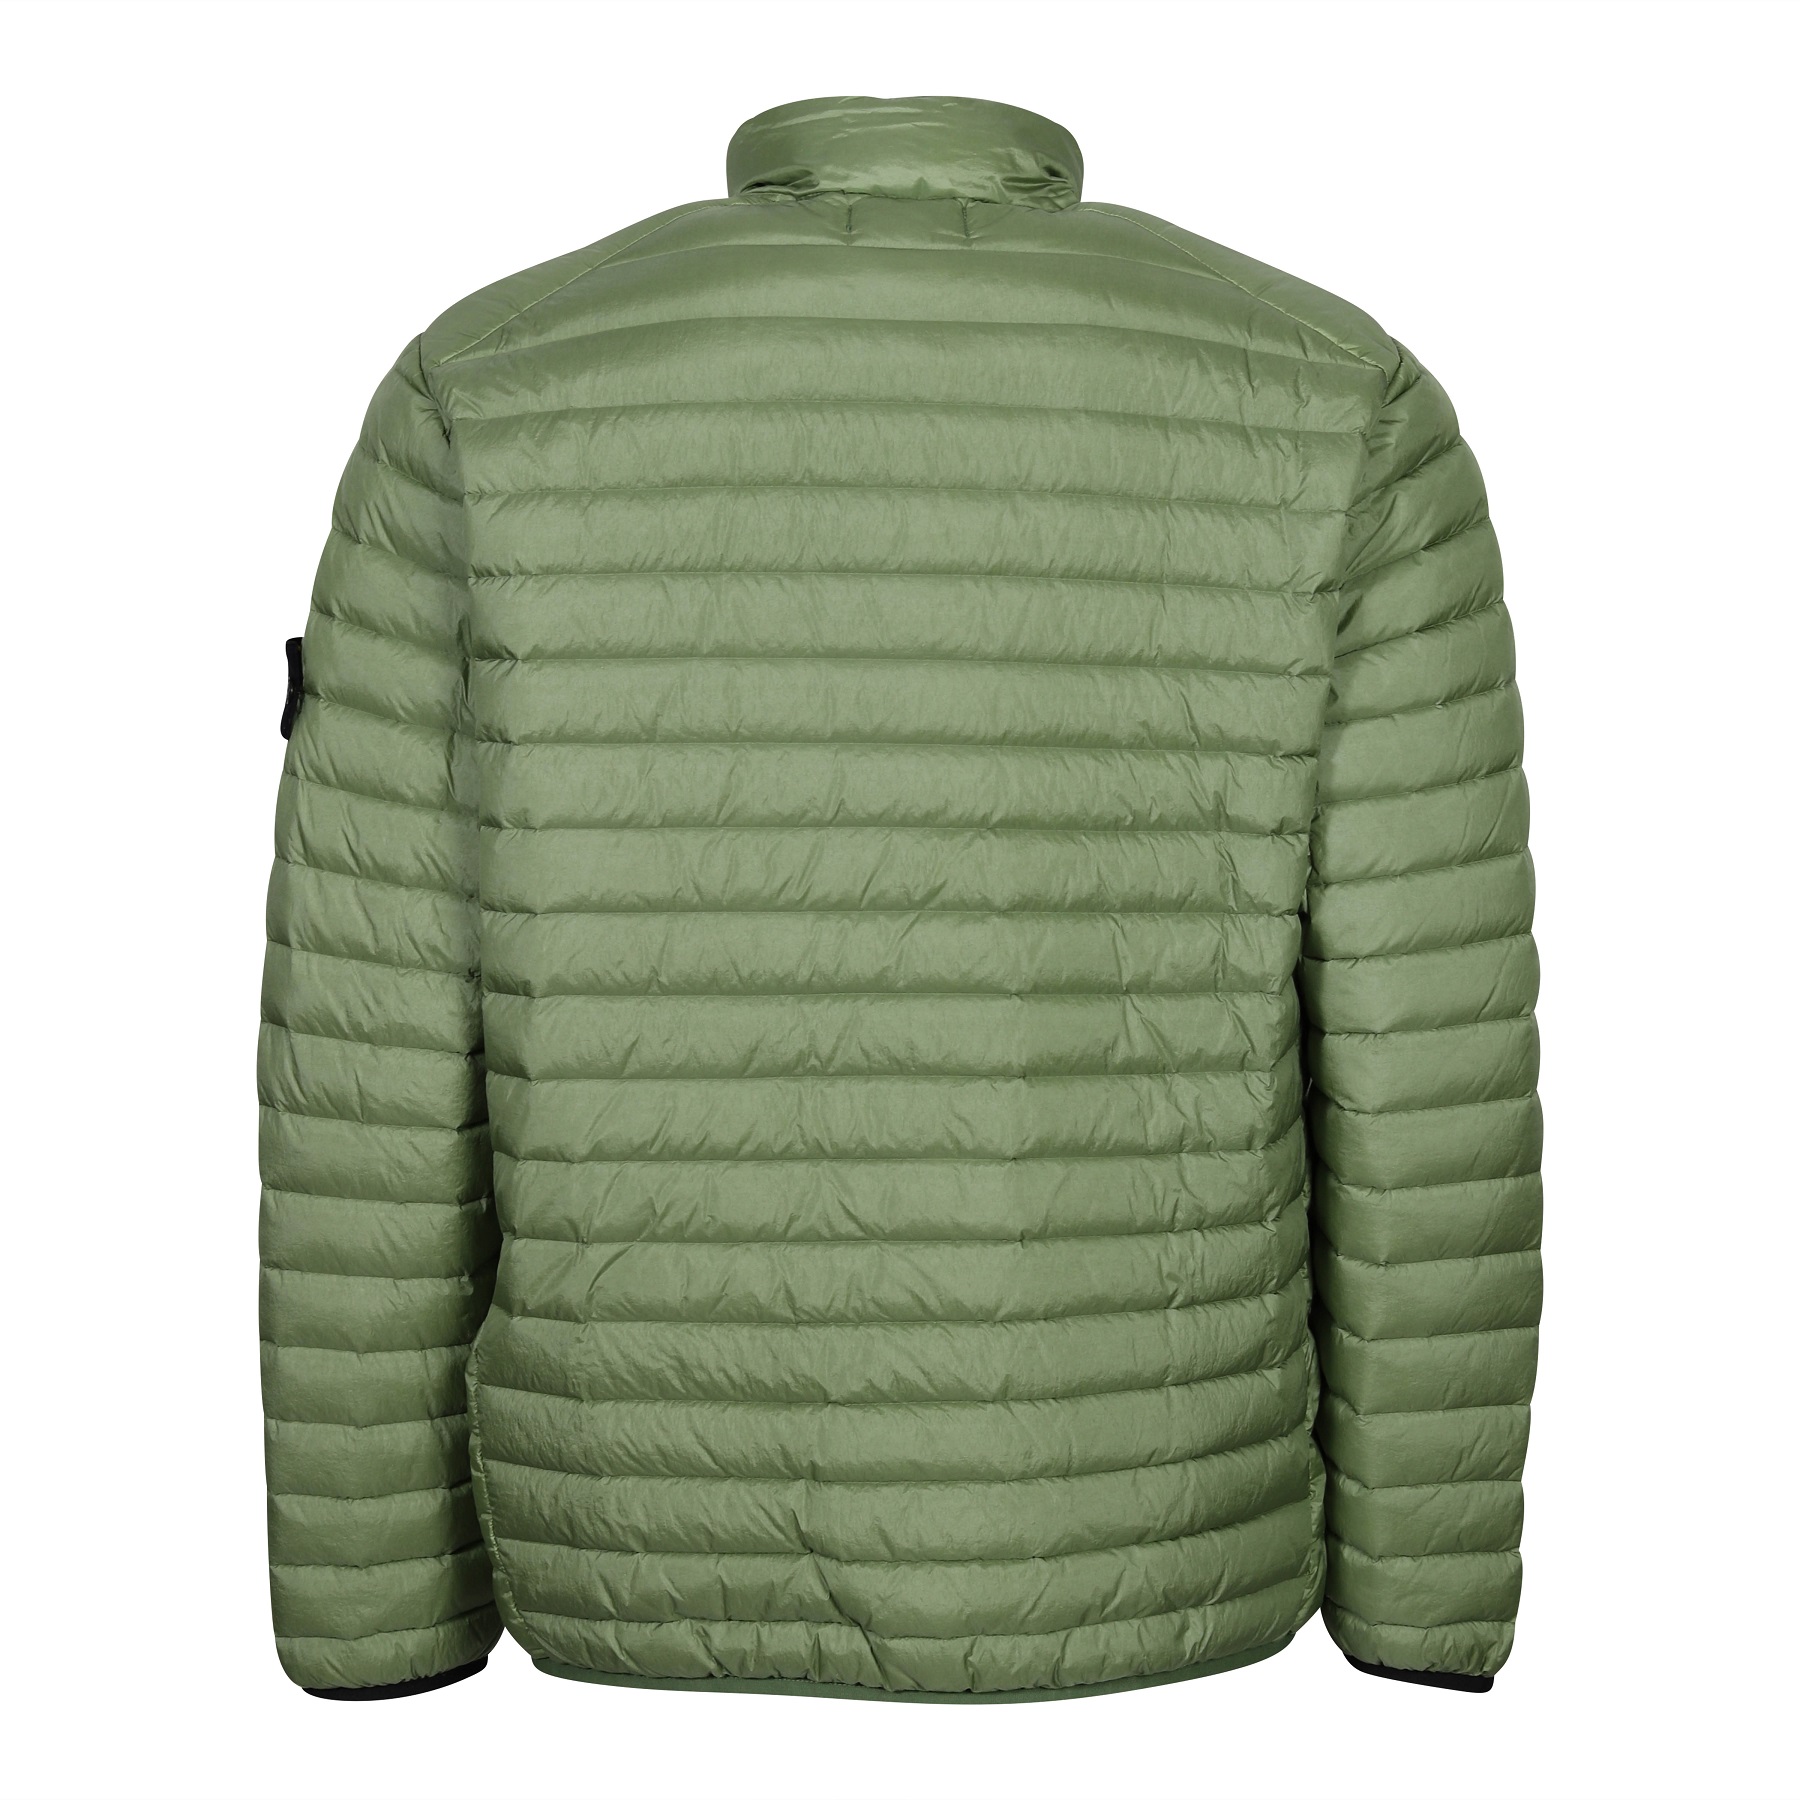 Stone Island Real Down Jacket in Olive